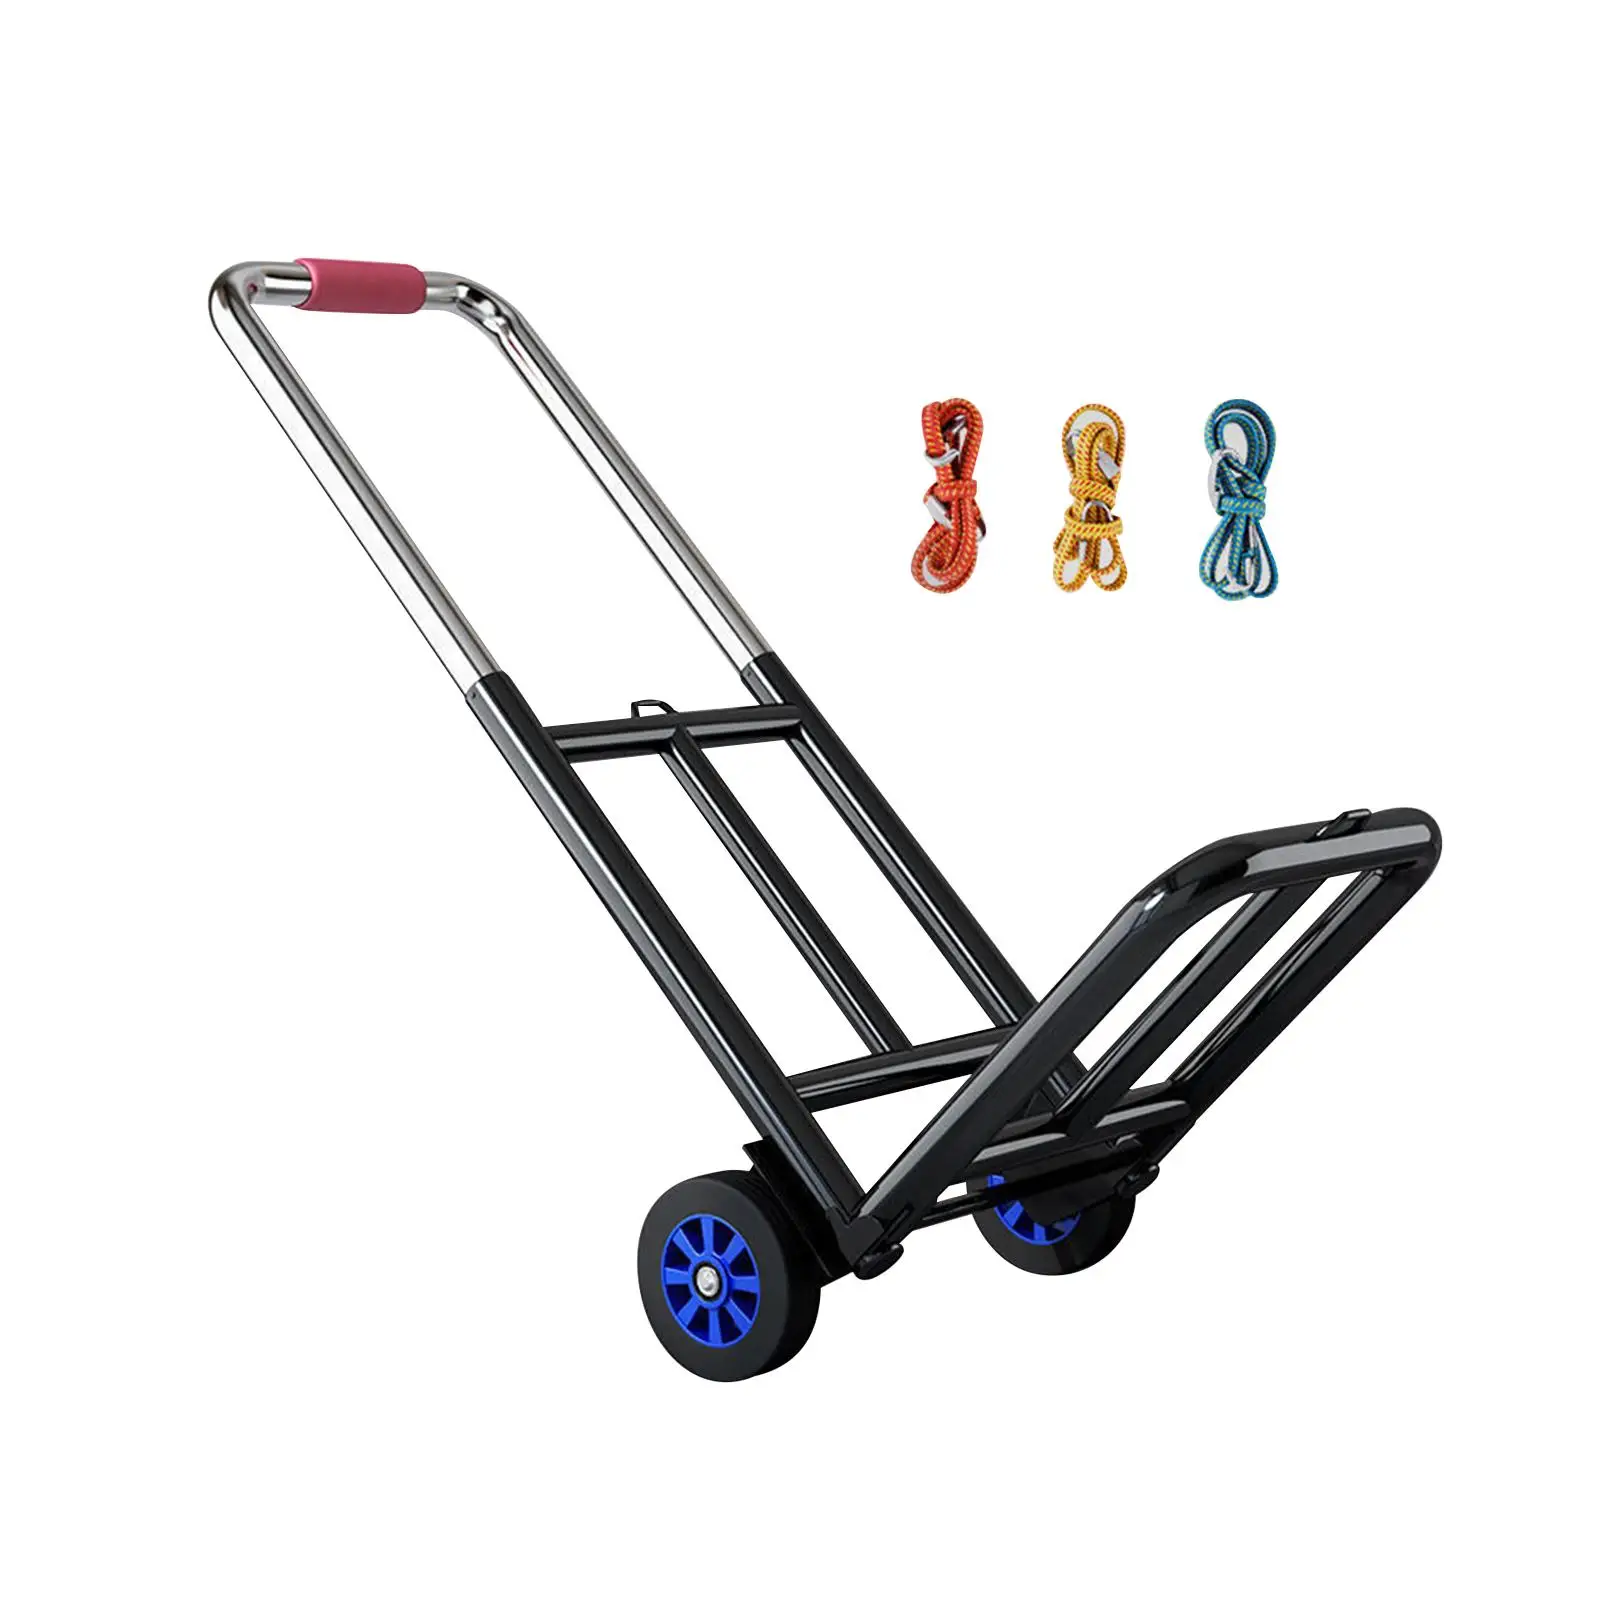 Folding Hand Truck Utility Cart Folding Hand Cart Heavy Duty Luggage Cart for Office